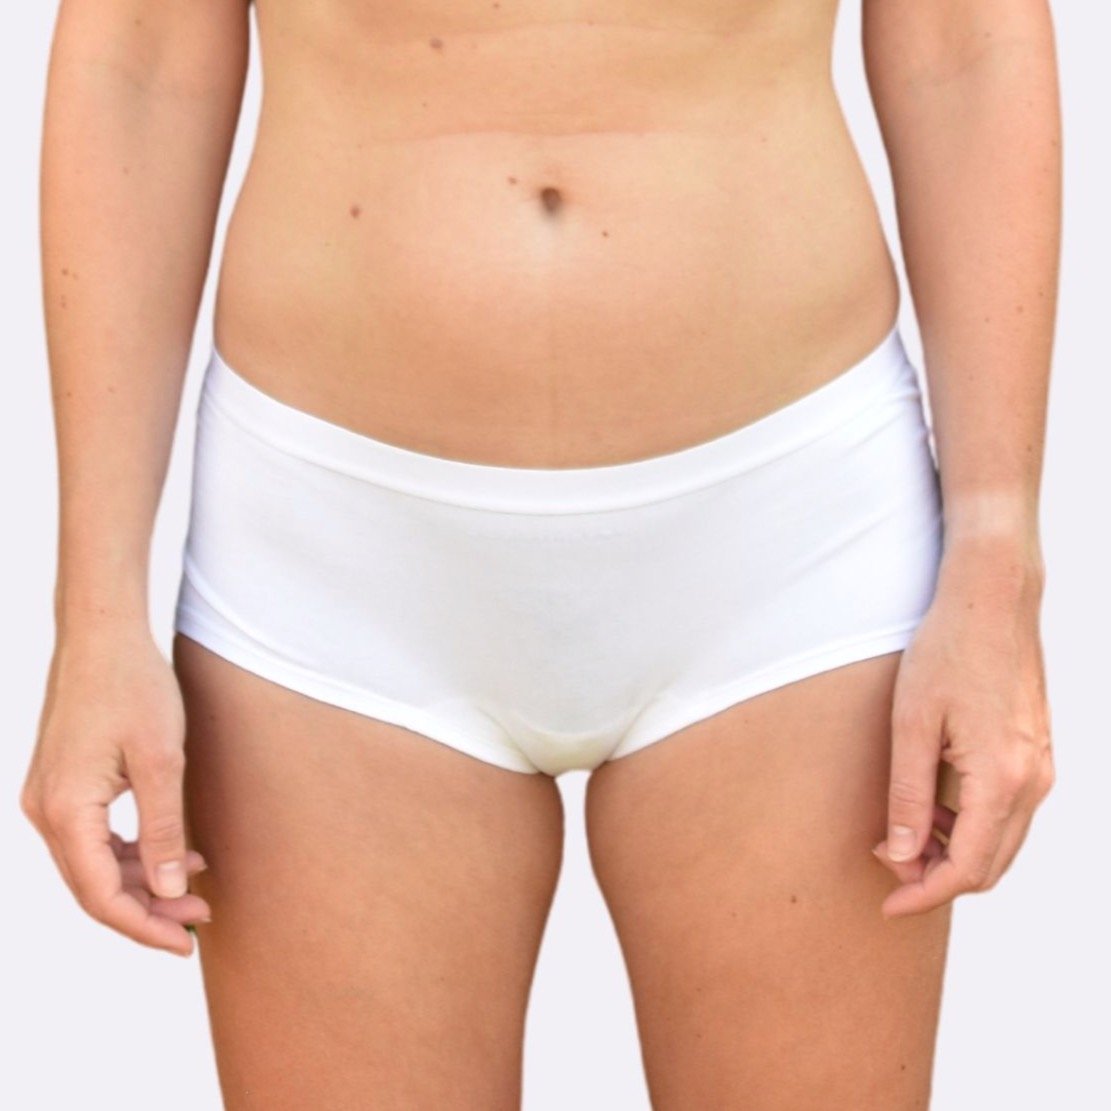 White Boy Shorts on a white background - Model Image - Front View